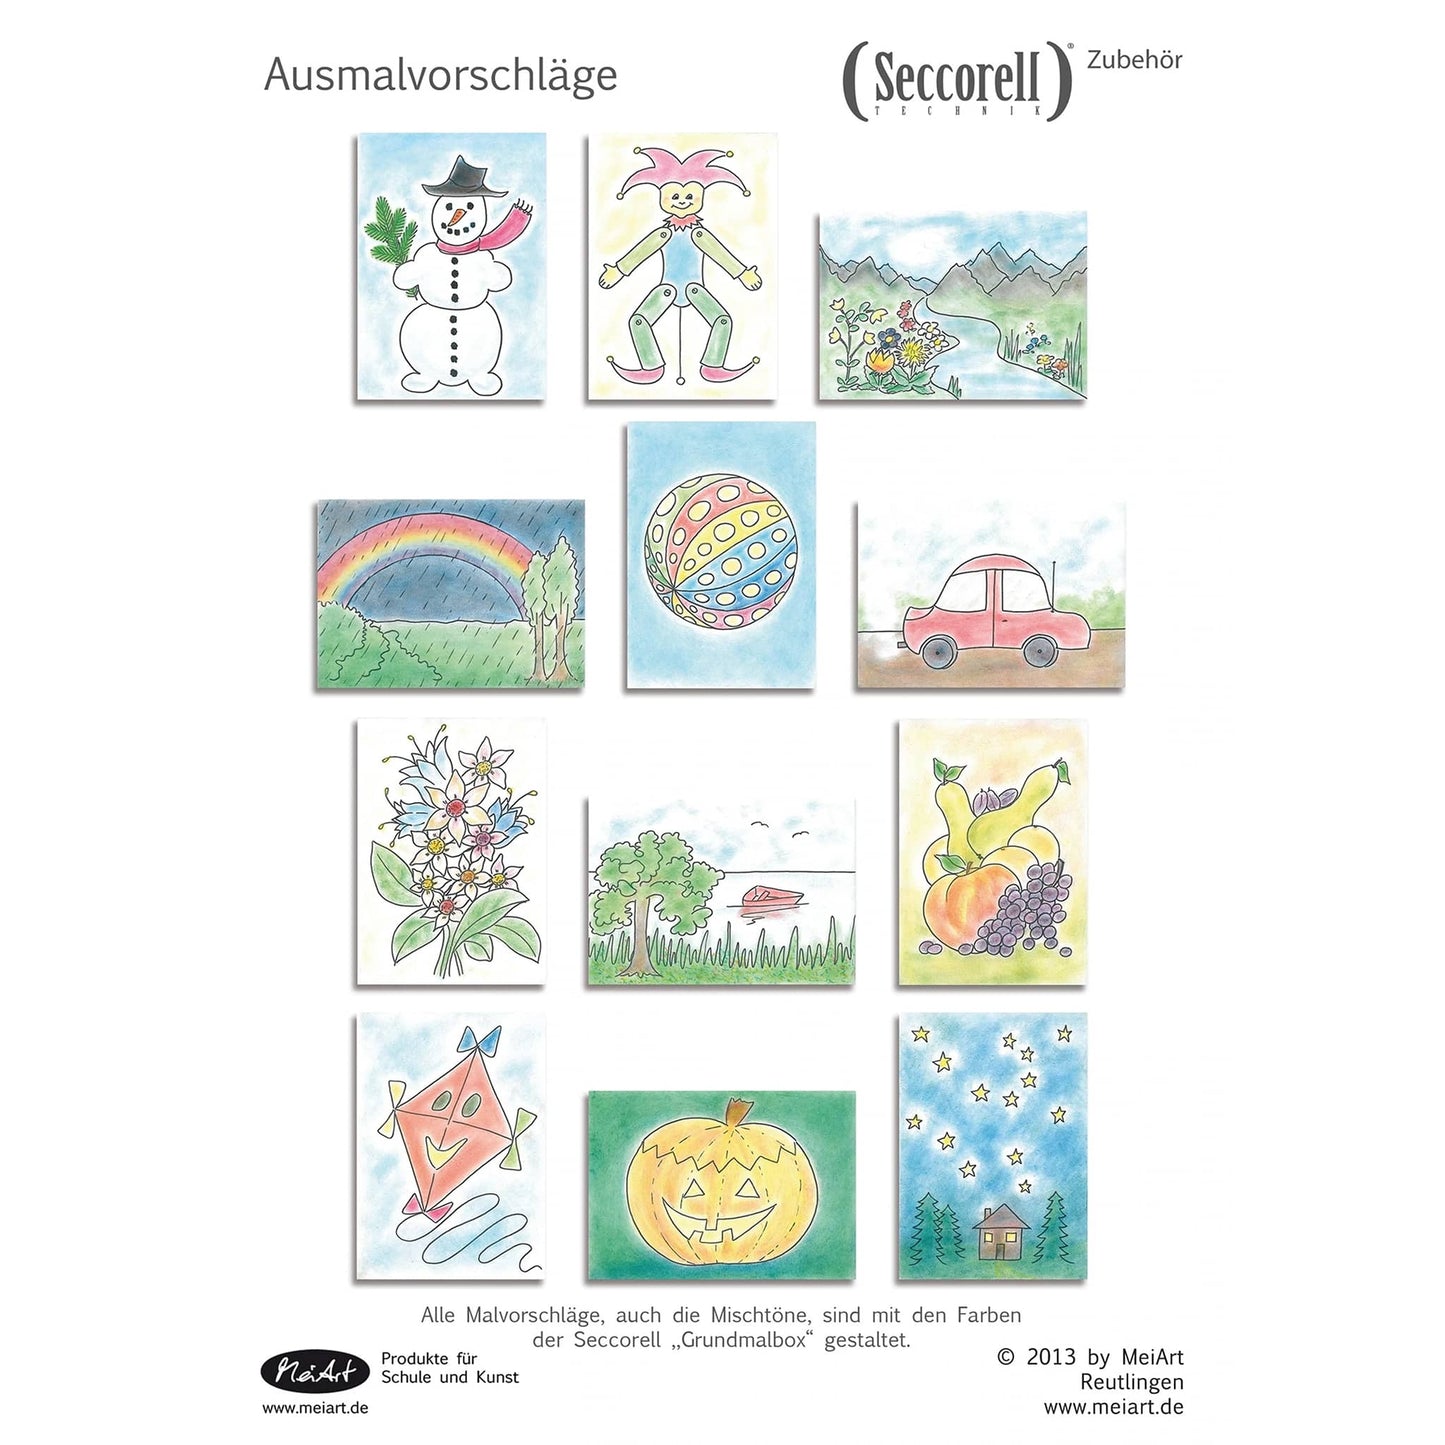 Seccorell coloring picture folder contains a variety of coloring suggestions for all seasons, designed with Seccorell colors, ideal for creative projects at school and during leisure time.